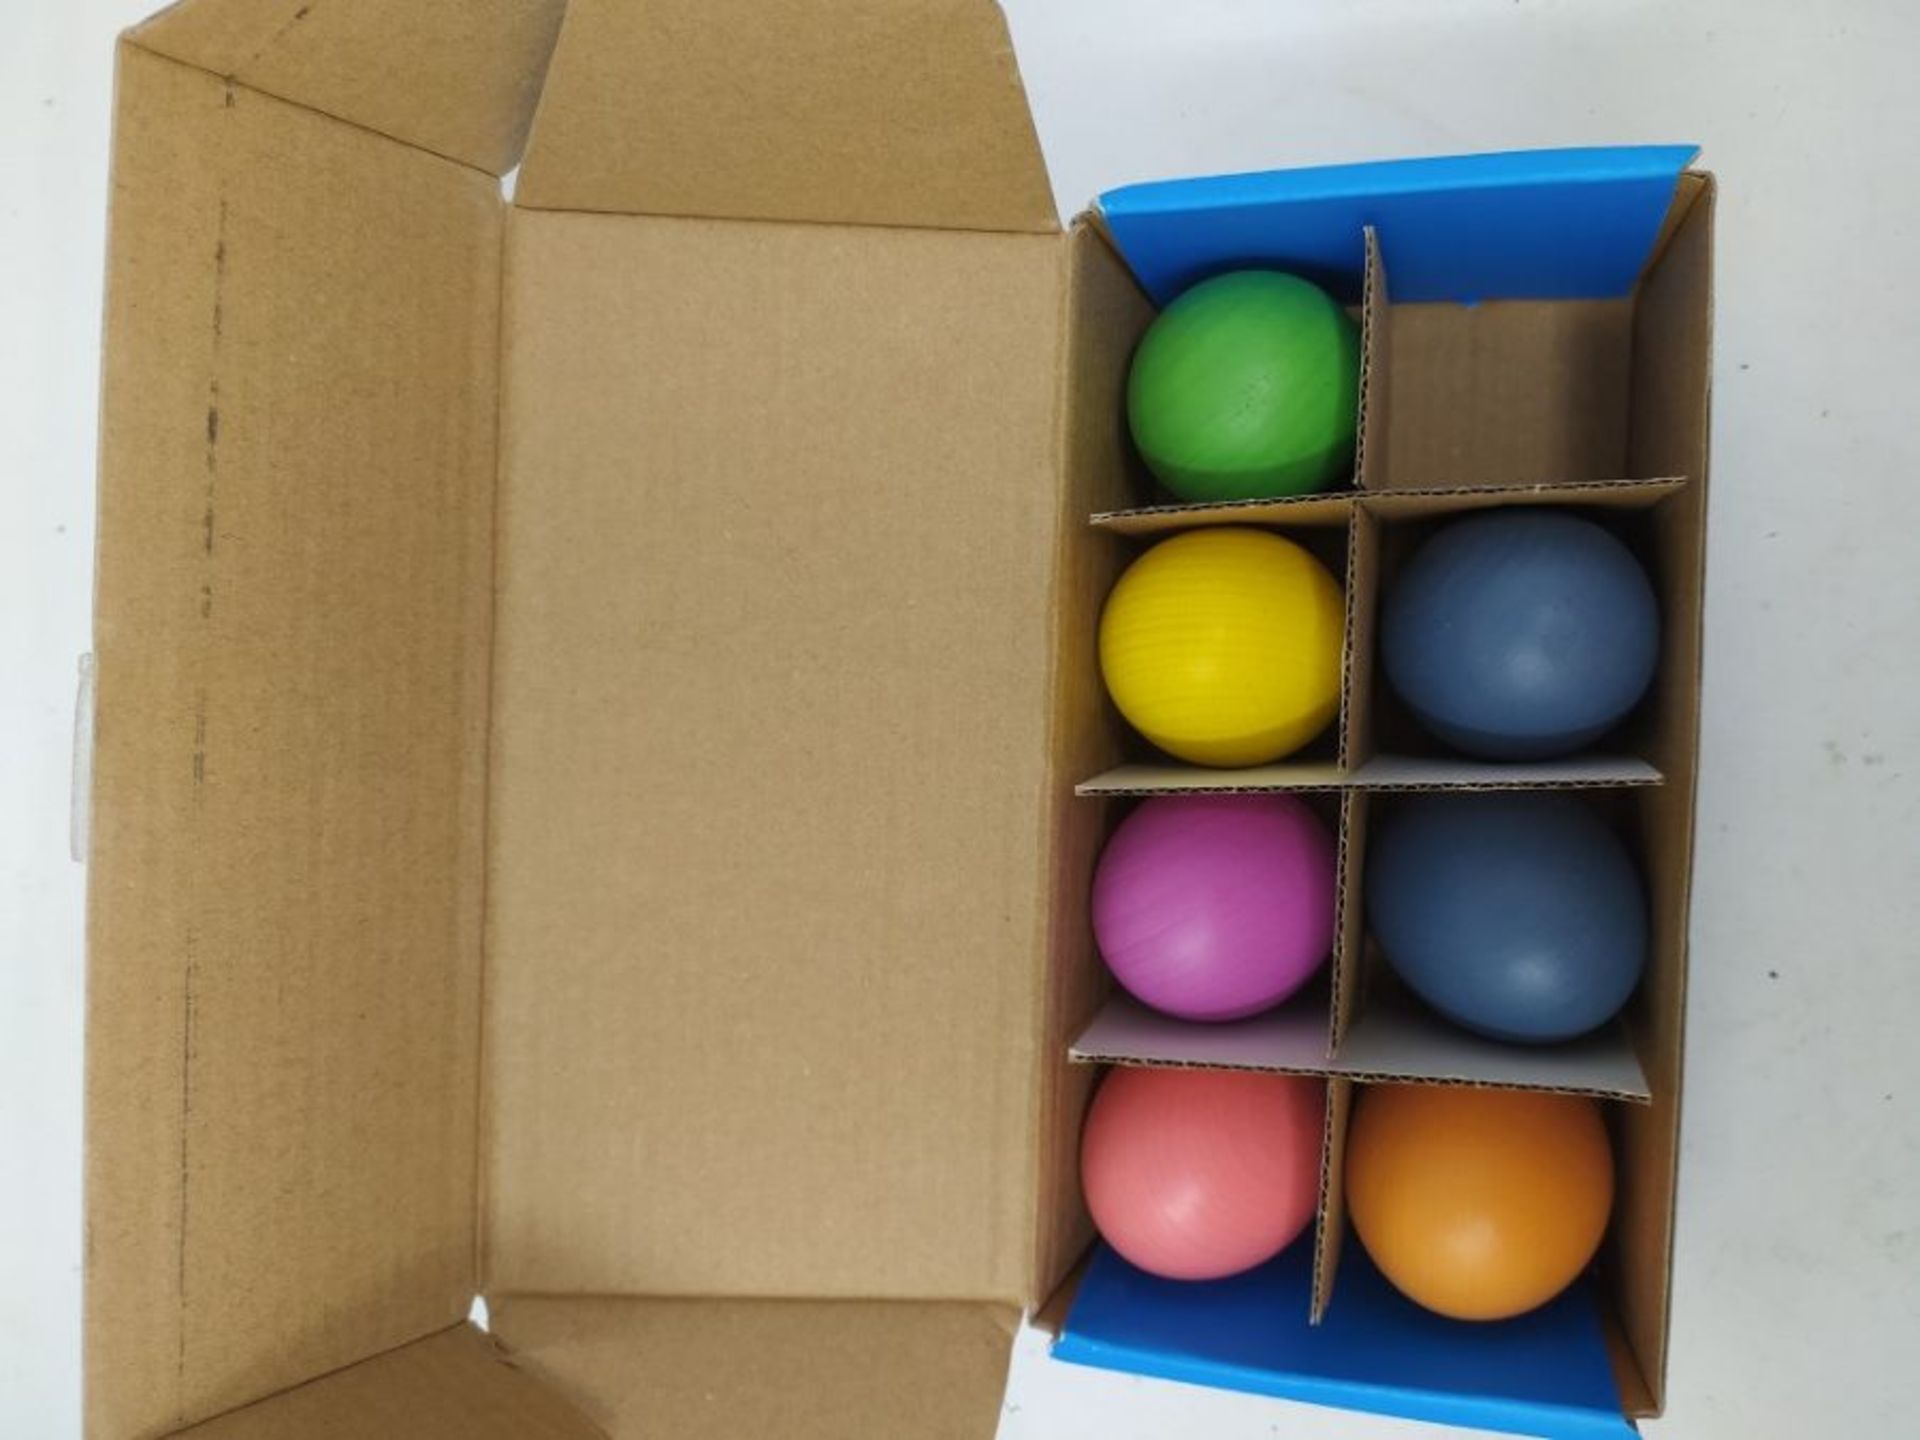 TickiT 74005 Rainbow Wooden Eggs Set of 7-A Pre-School Educational Toy - Image 2 of 2